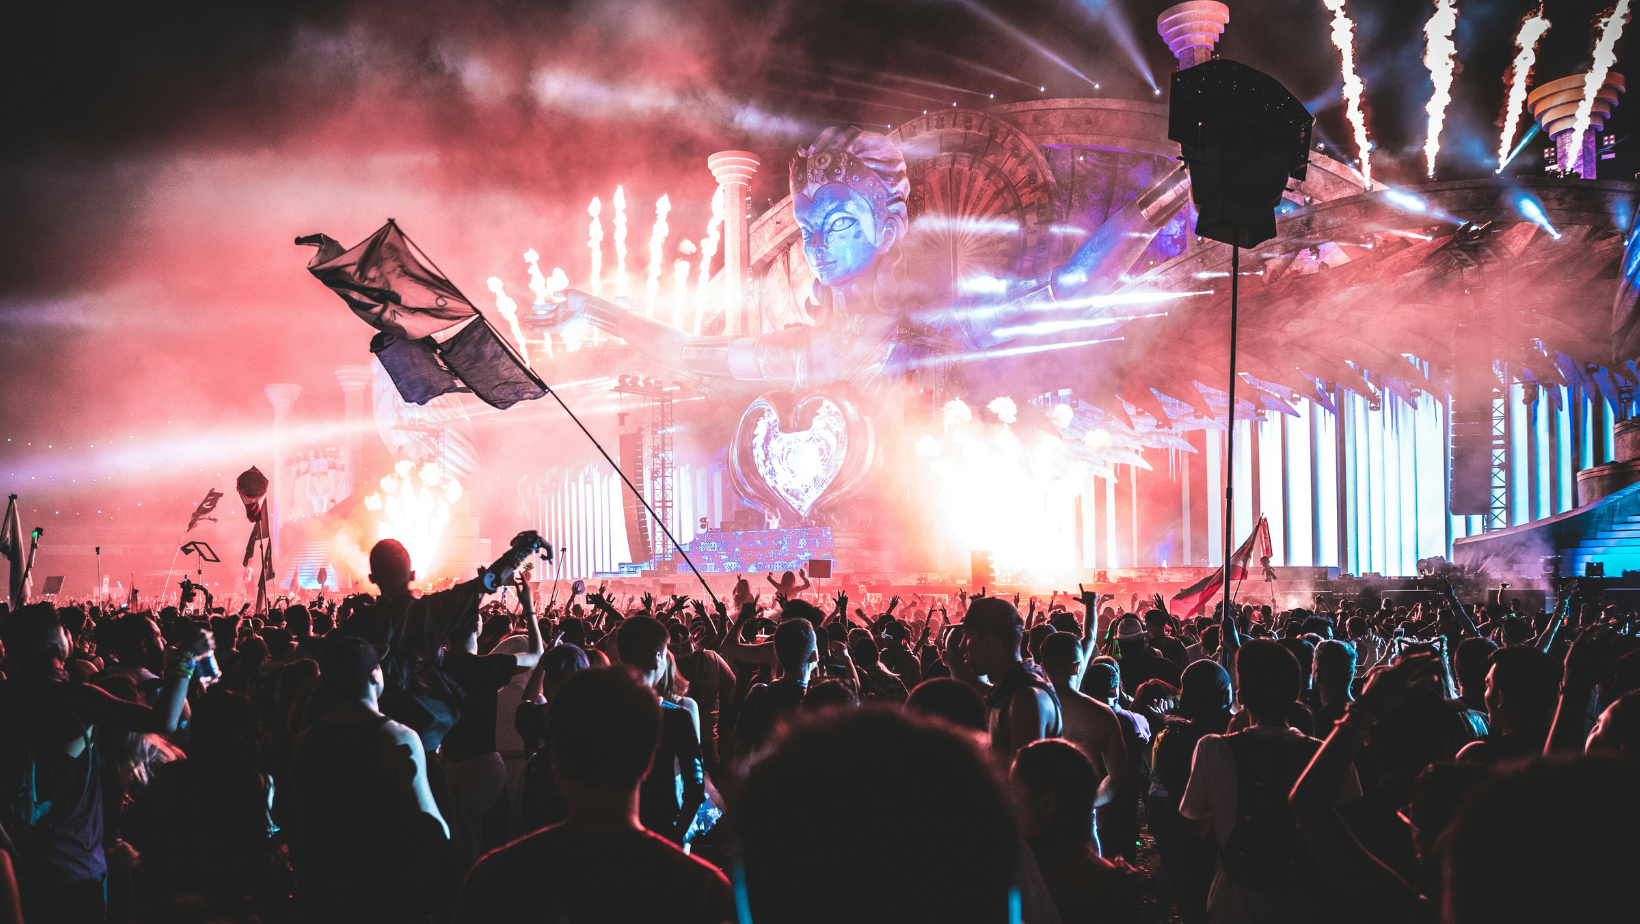 An exhilarating festival scene showcasing a grand stage with a heart-shaped centerpiece, framed by the imposing figure of a deity. The air is alive with a vibrant mix of red and blue lighting, while fireworks and pyrotechnics light up the night sky, creating a visually stunning backdrop. Energetic crowds, some with flags, are bathed in the glow of the spectacle, illustrating the transformative power of specialty gases in creating breathtaking pyrotechnic and atmospheric effects at large-scale events.